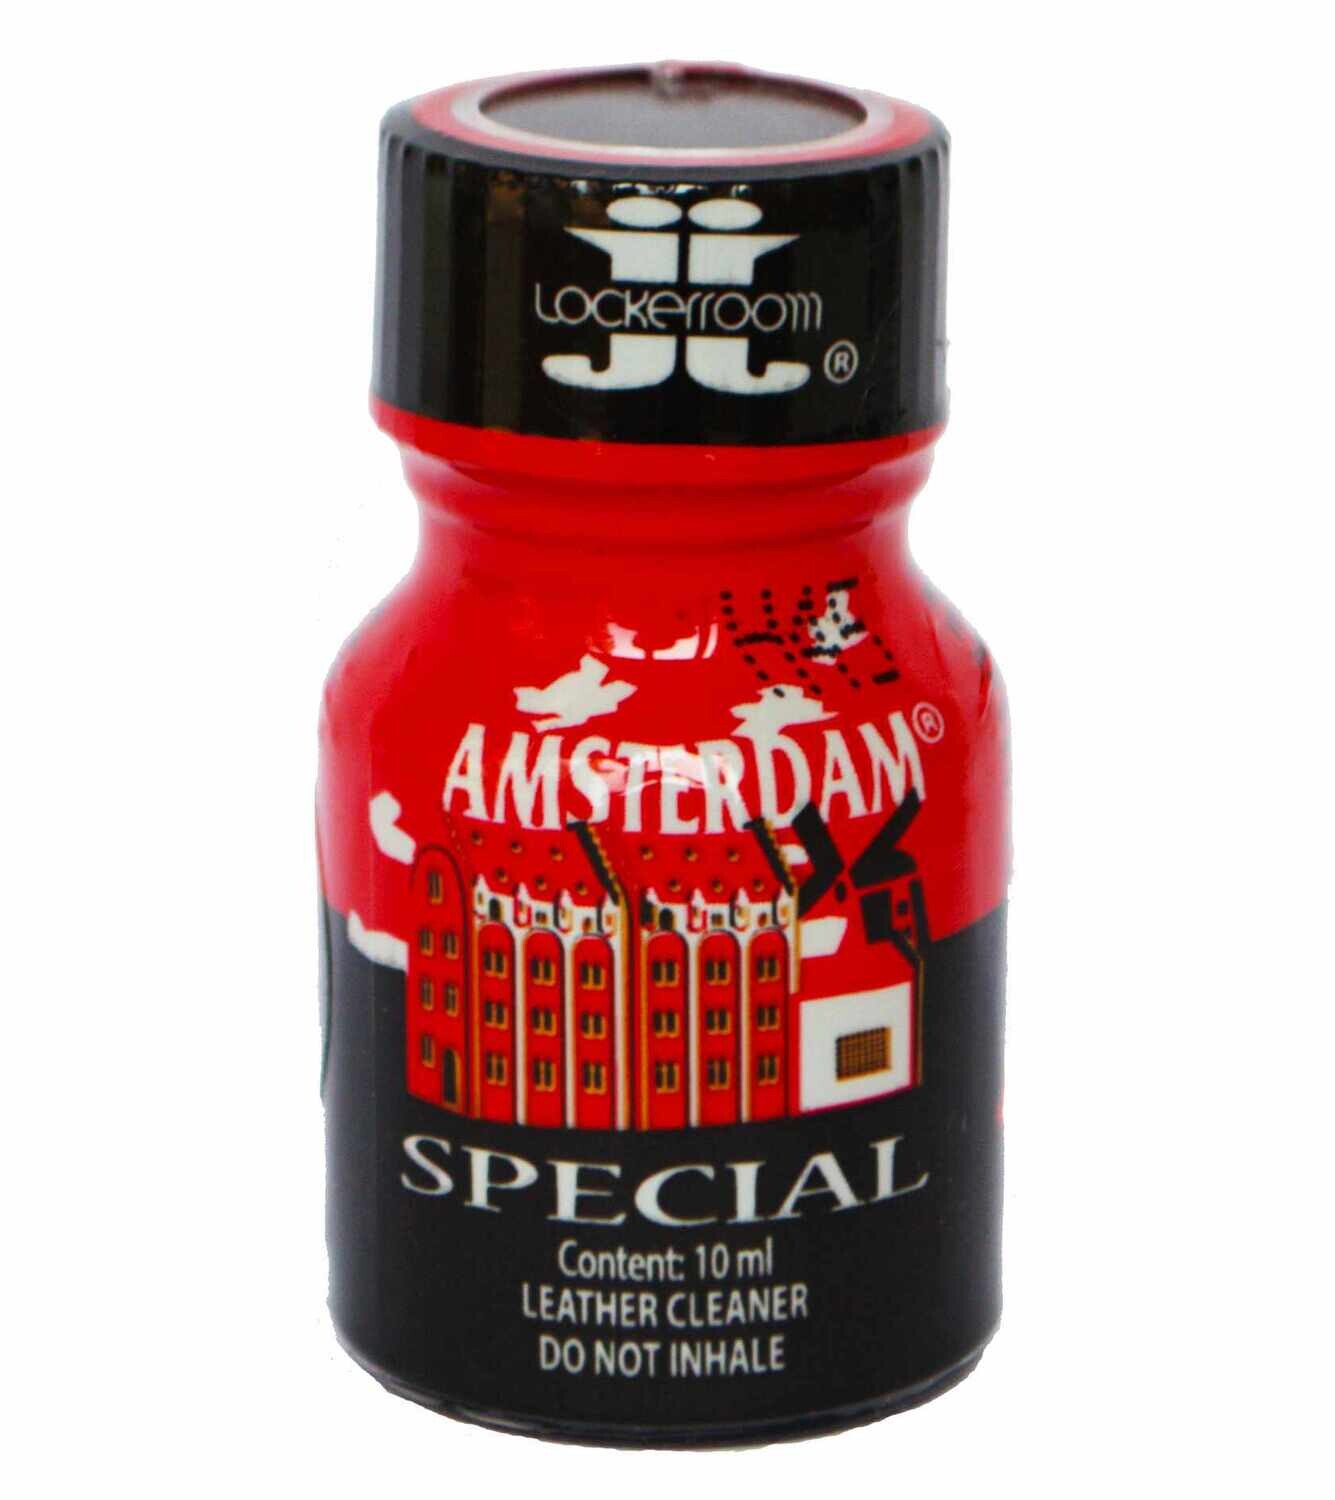 Amsterdam special 10 ml.